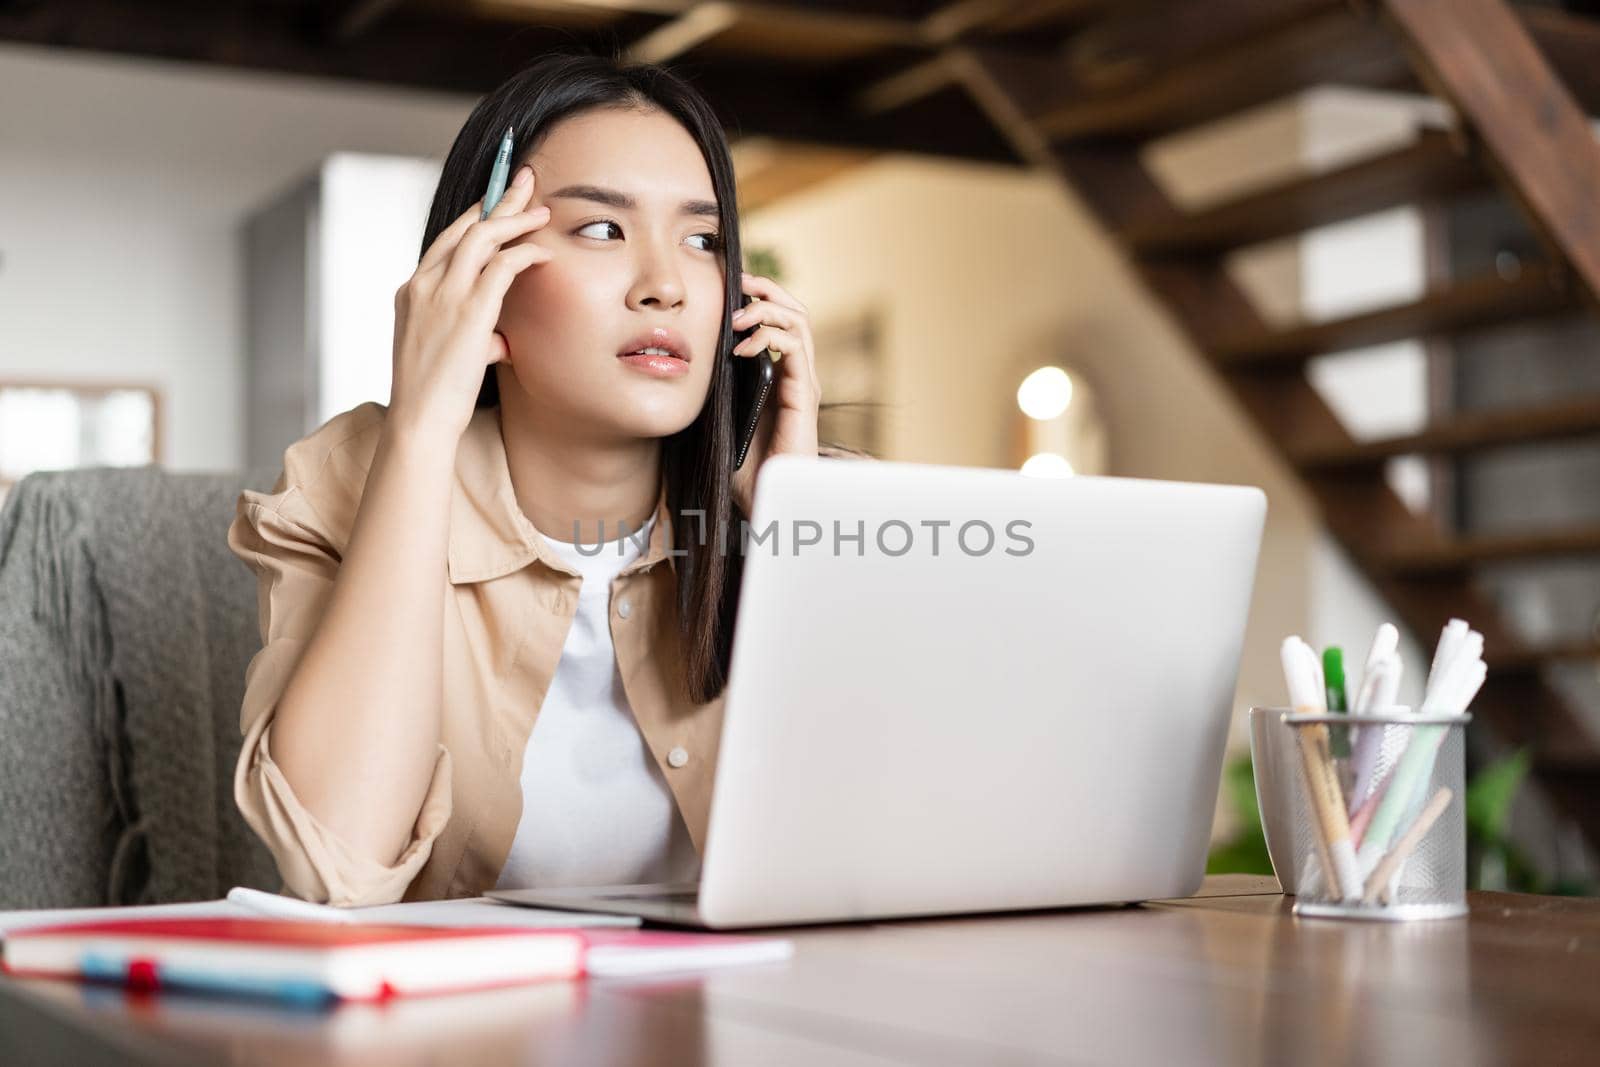 Asian girl answer phone call, looking thoughtful while communicating on phone. Young woman working from home on laptop.